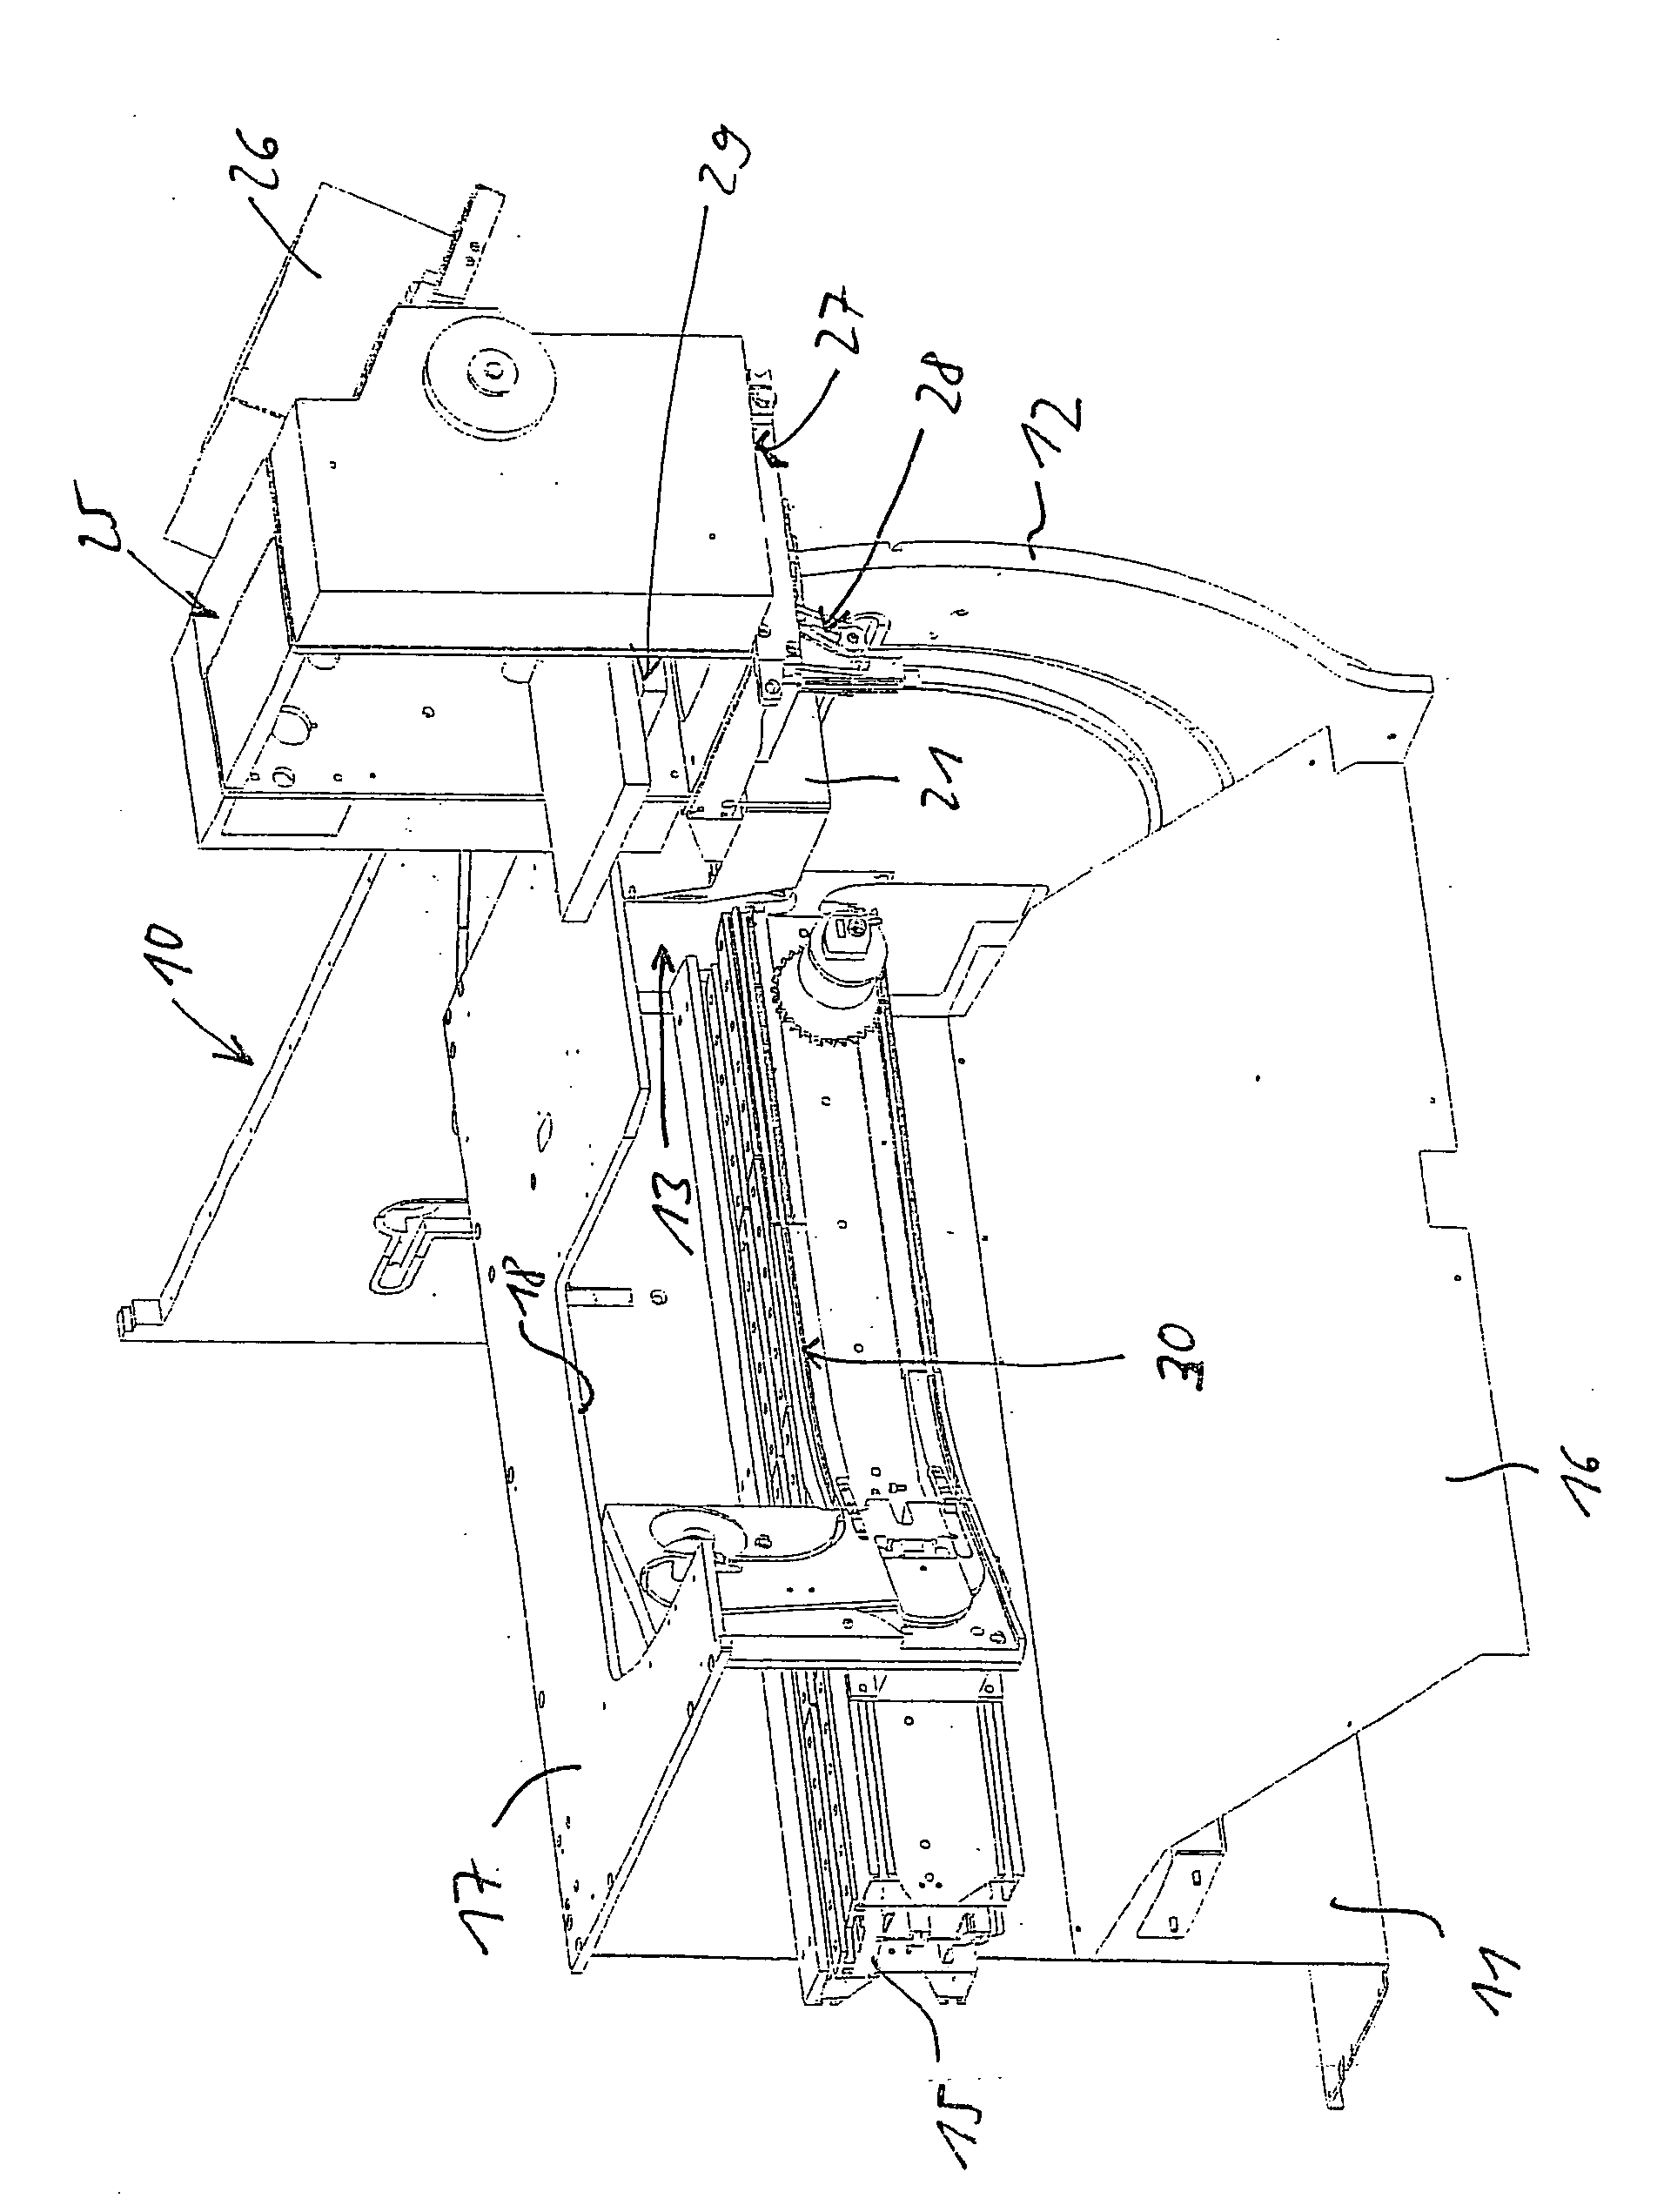 Apparatus for delivering package inserts or the like to folding boxes in a packaging machine